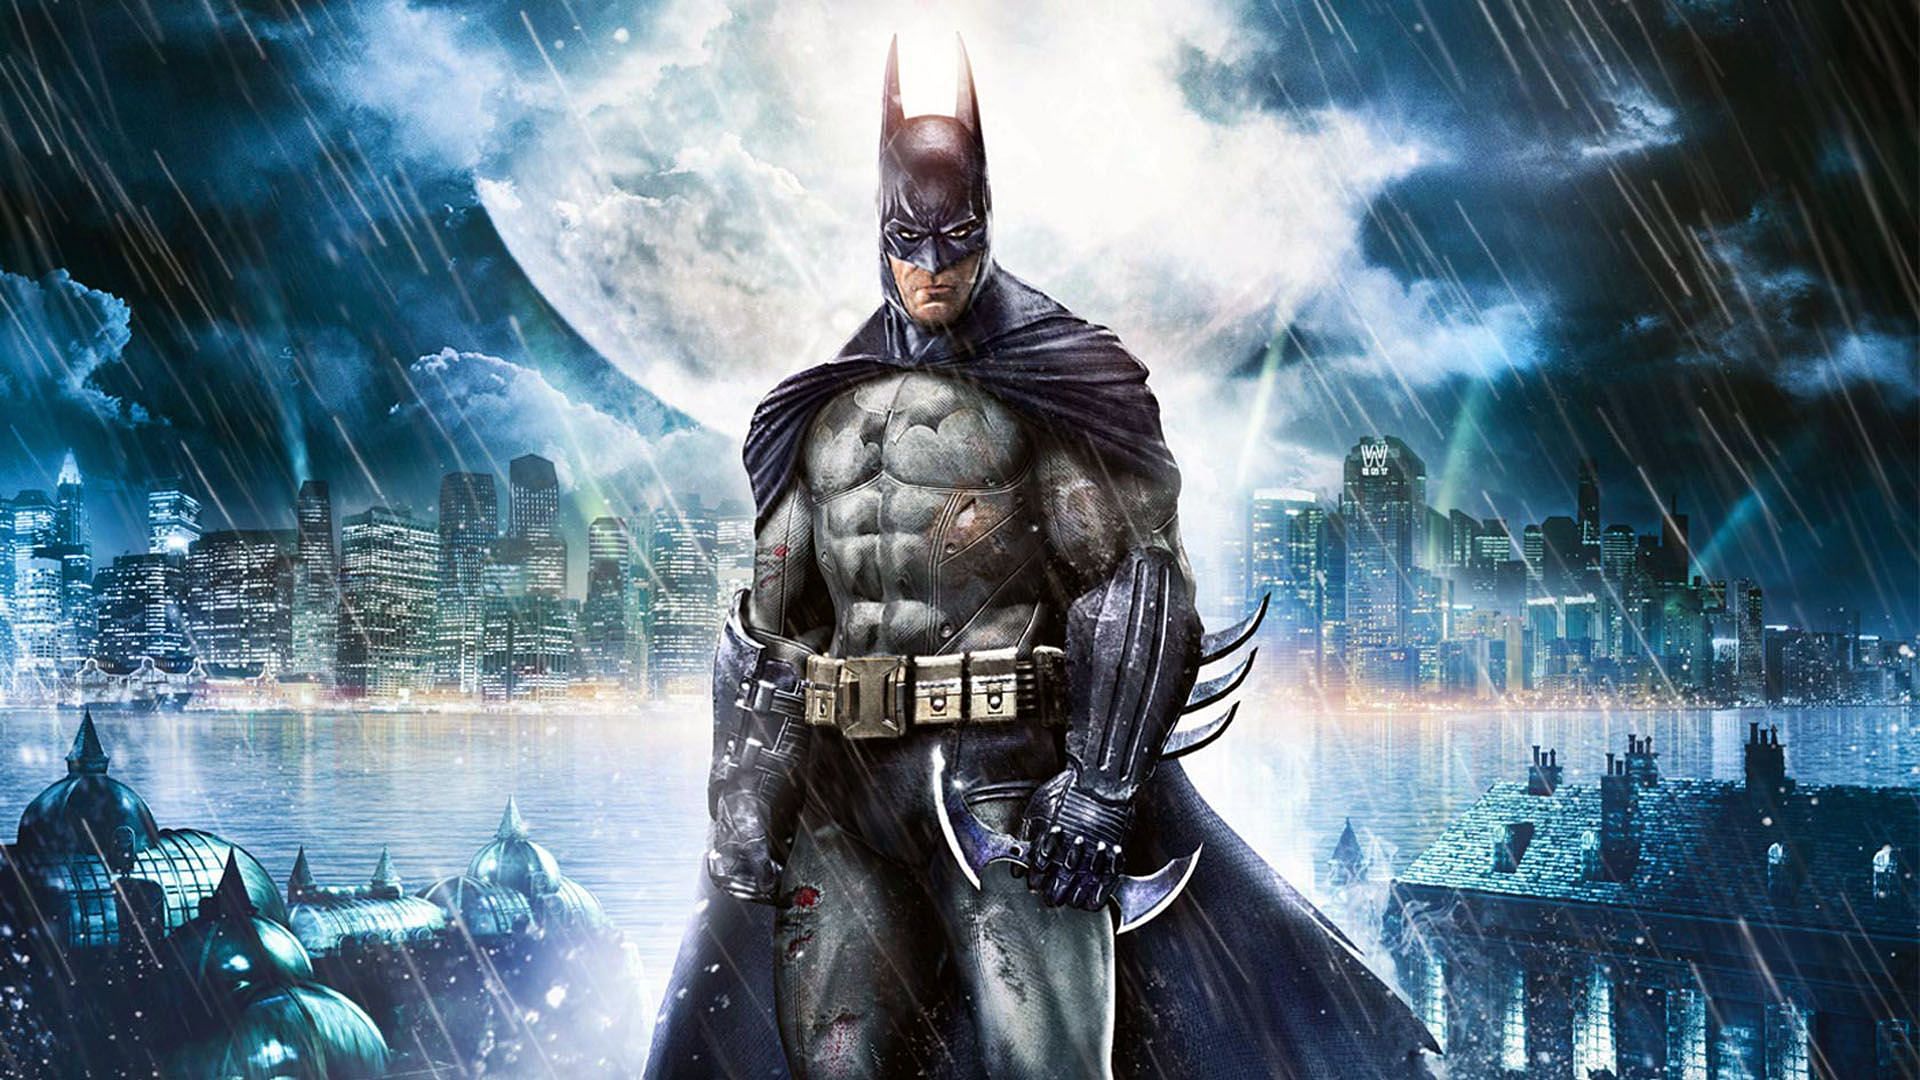 Batman: Arkham Asylum wowed fans with its story and gameplay (Image via Rocksteady)